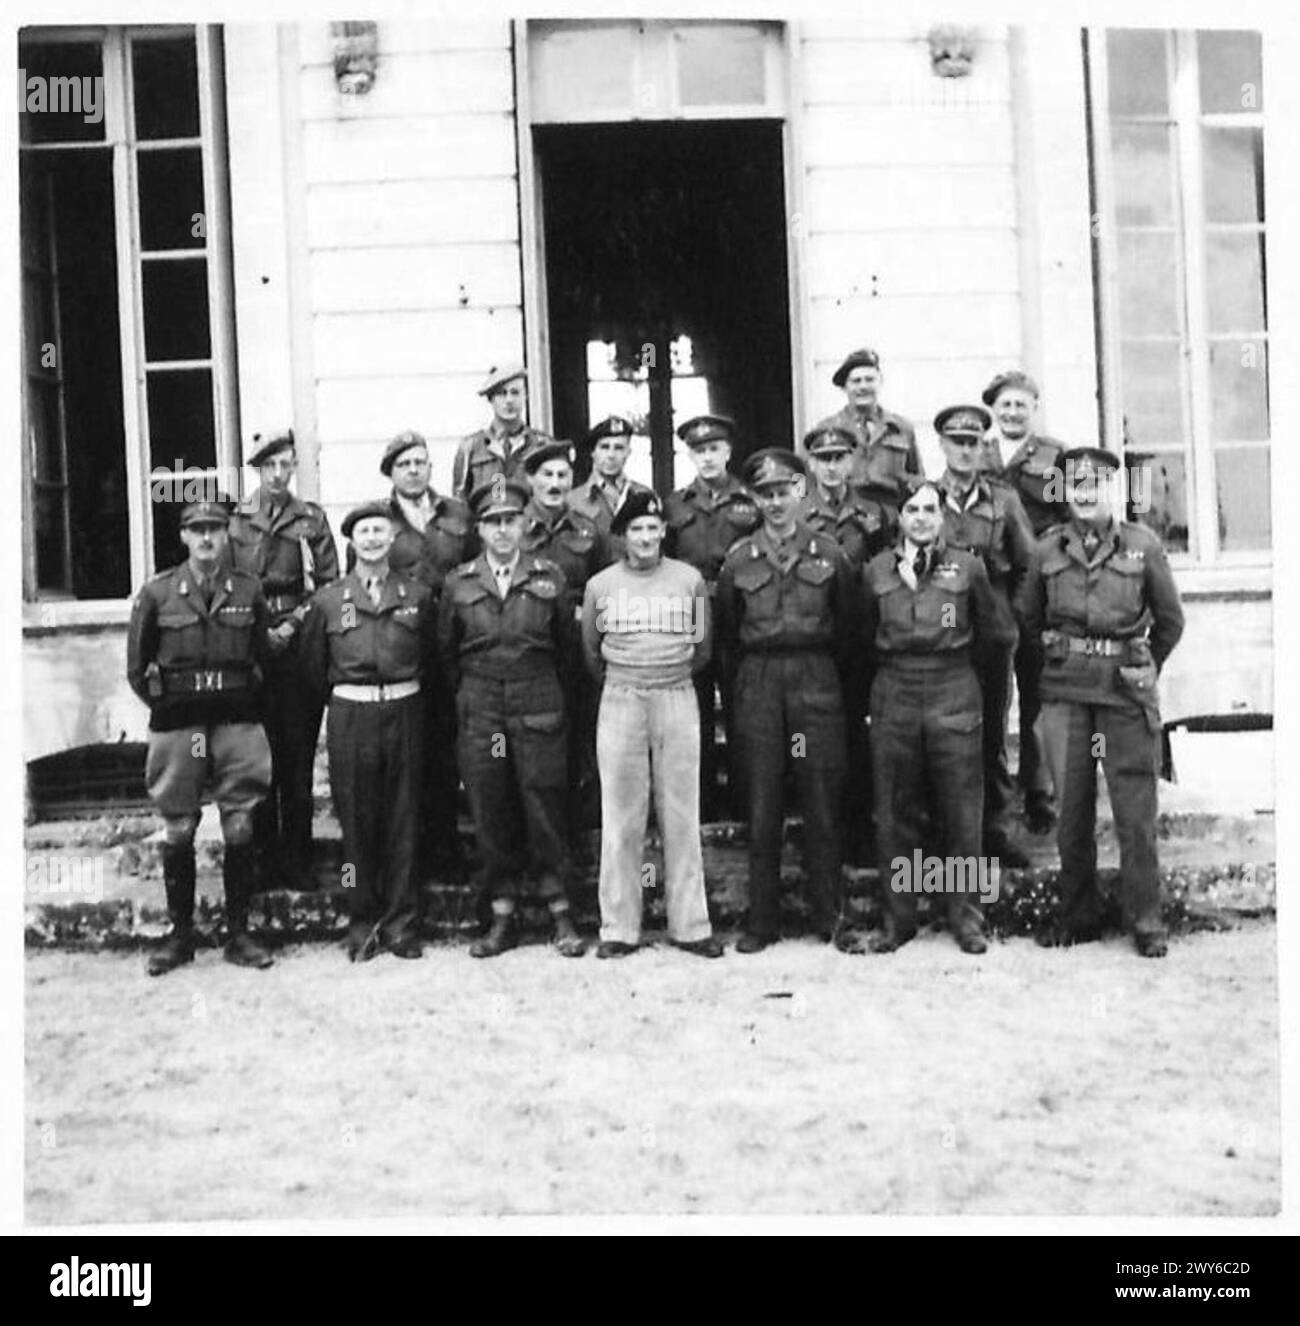 GENERAL MONTGOMERY WITH HIS COMMANDERS - Group showing General Montgomery with his Commanders. Major General Keller, 3 Canadian Division; Lieut.-General G. C. Bucknall, 30 Corps; Lieut.-General Crerar, 1 Canadian Army; General Sir Bernard Montgomery, 21 Army Group; Lieut.-General M. C. Dempsey, 2 British Army; A. V. Marshall Broadhurst, 83 Group TAF; Lieut.-General Ritchie, 12 Corps; Major General Thomas, 43 Division; Major General D. A. H. Graham, 50 Division; Lieut.-General Sir R. N. O'Connor, 8 Corps; Major General E. H. Barker, 49 Division; Lieut.-General J. T. Crocker, 1 Corps; Major Gene Stock Photo